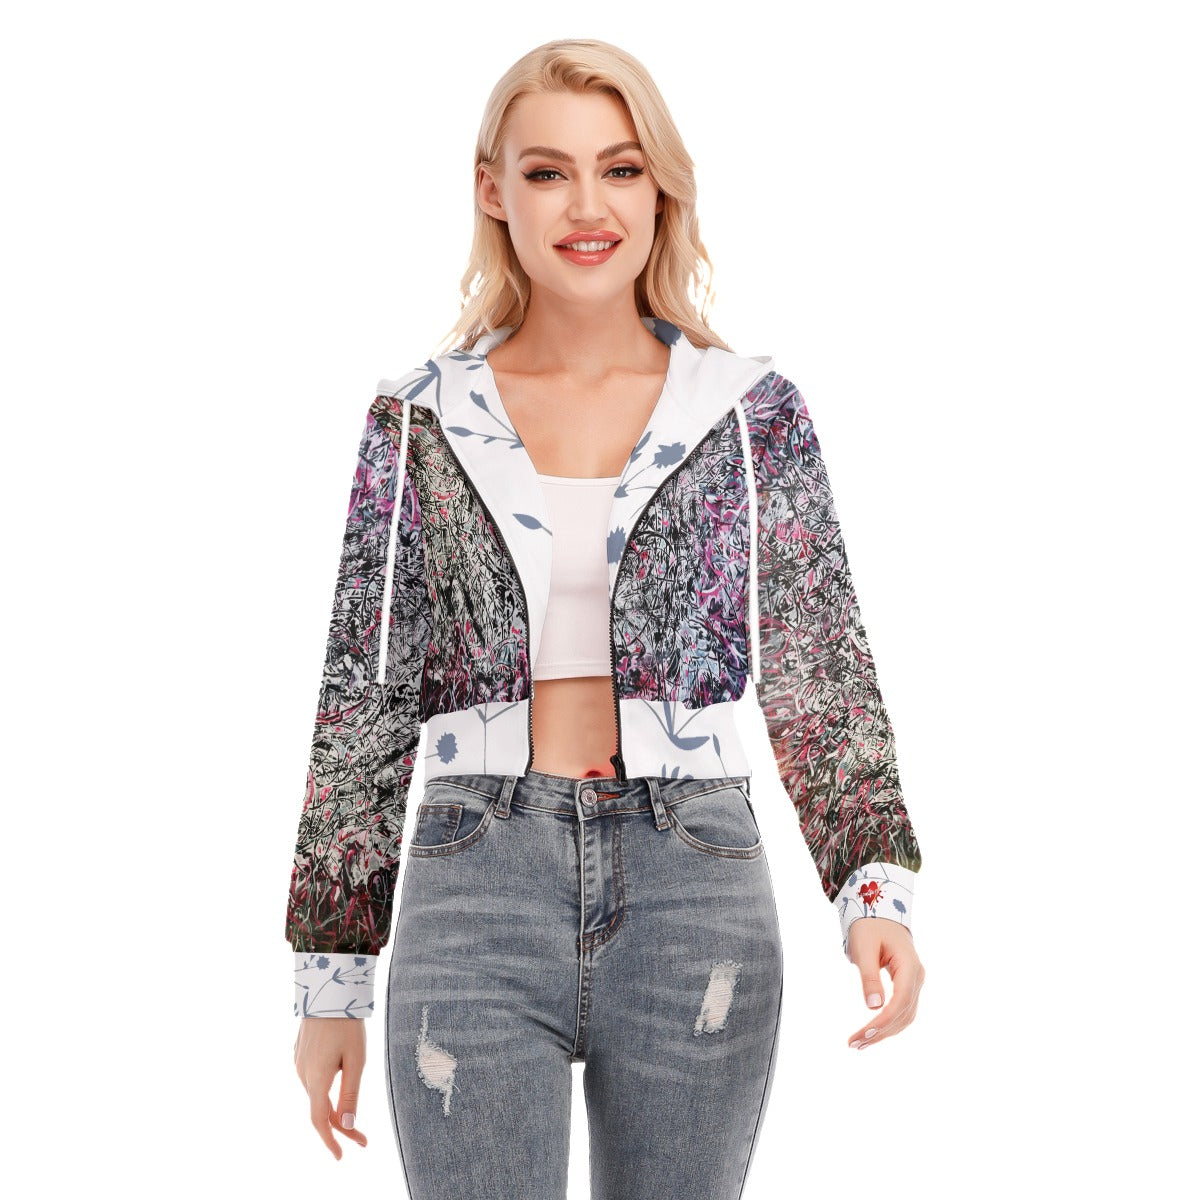 All-Over Print Women's Crop Top Hoodie With Zipper Closure Winter Collection